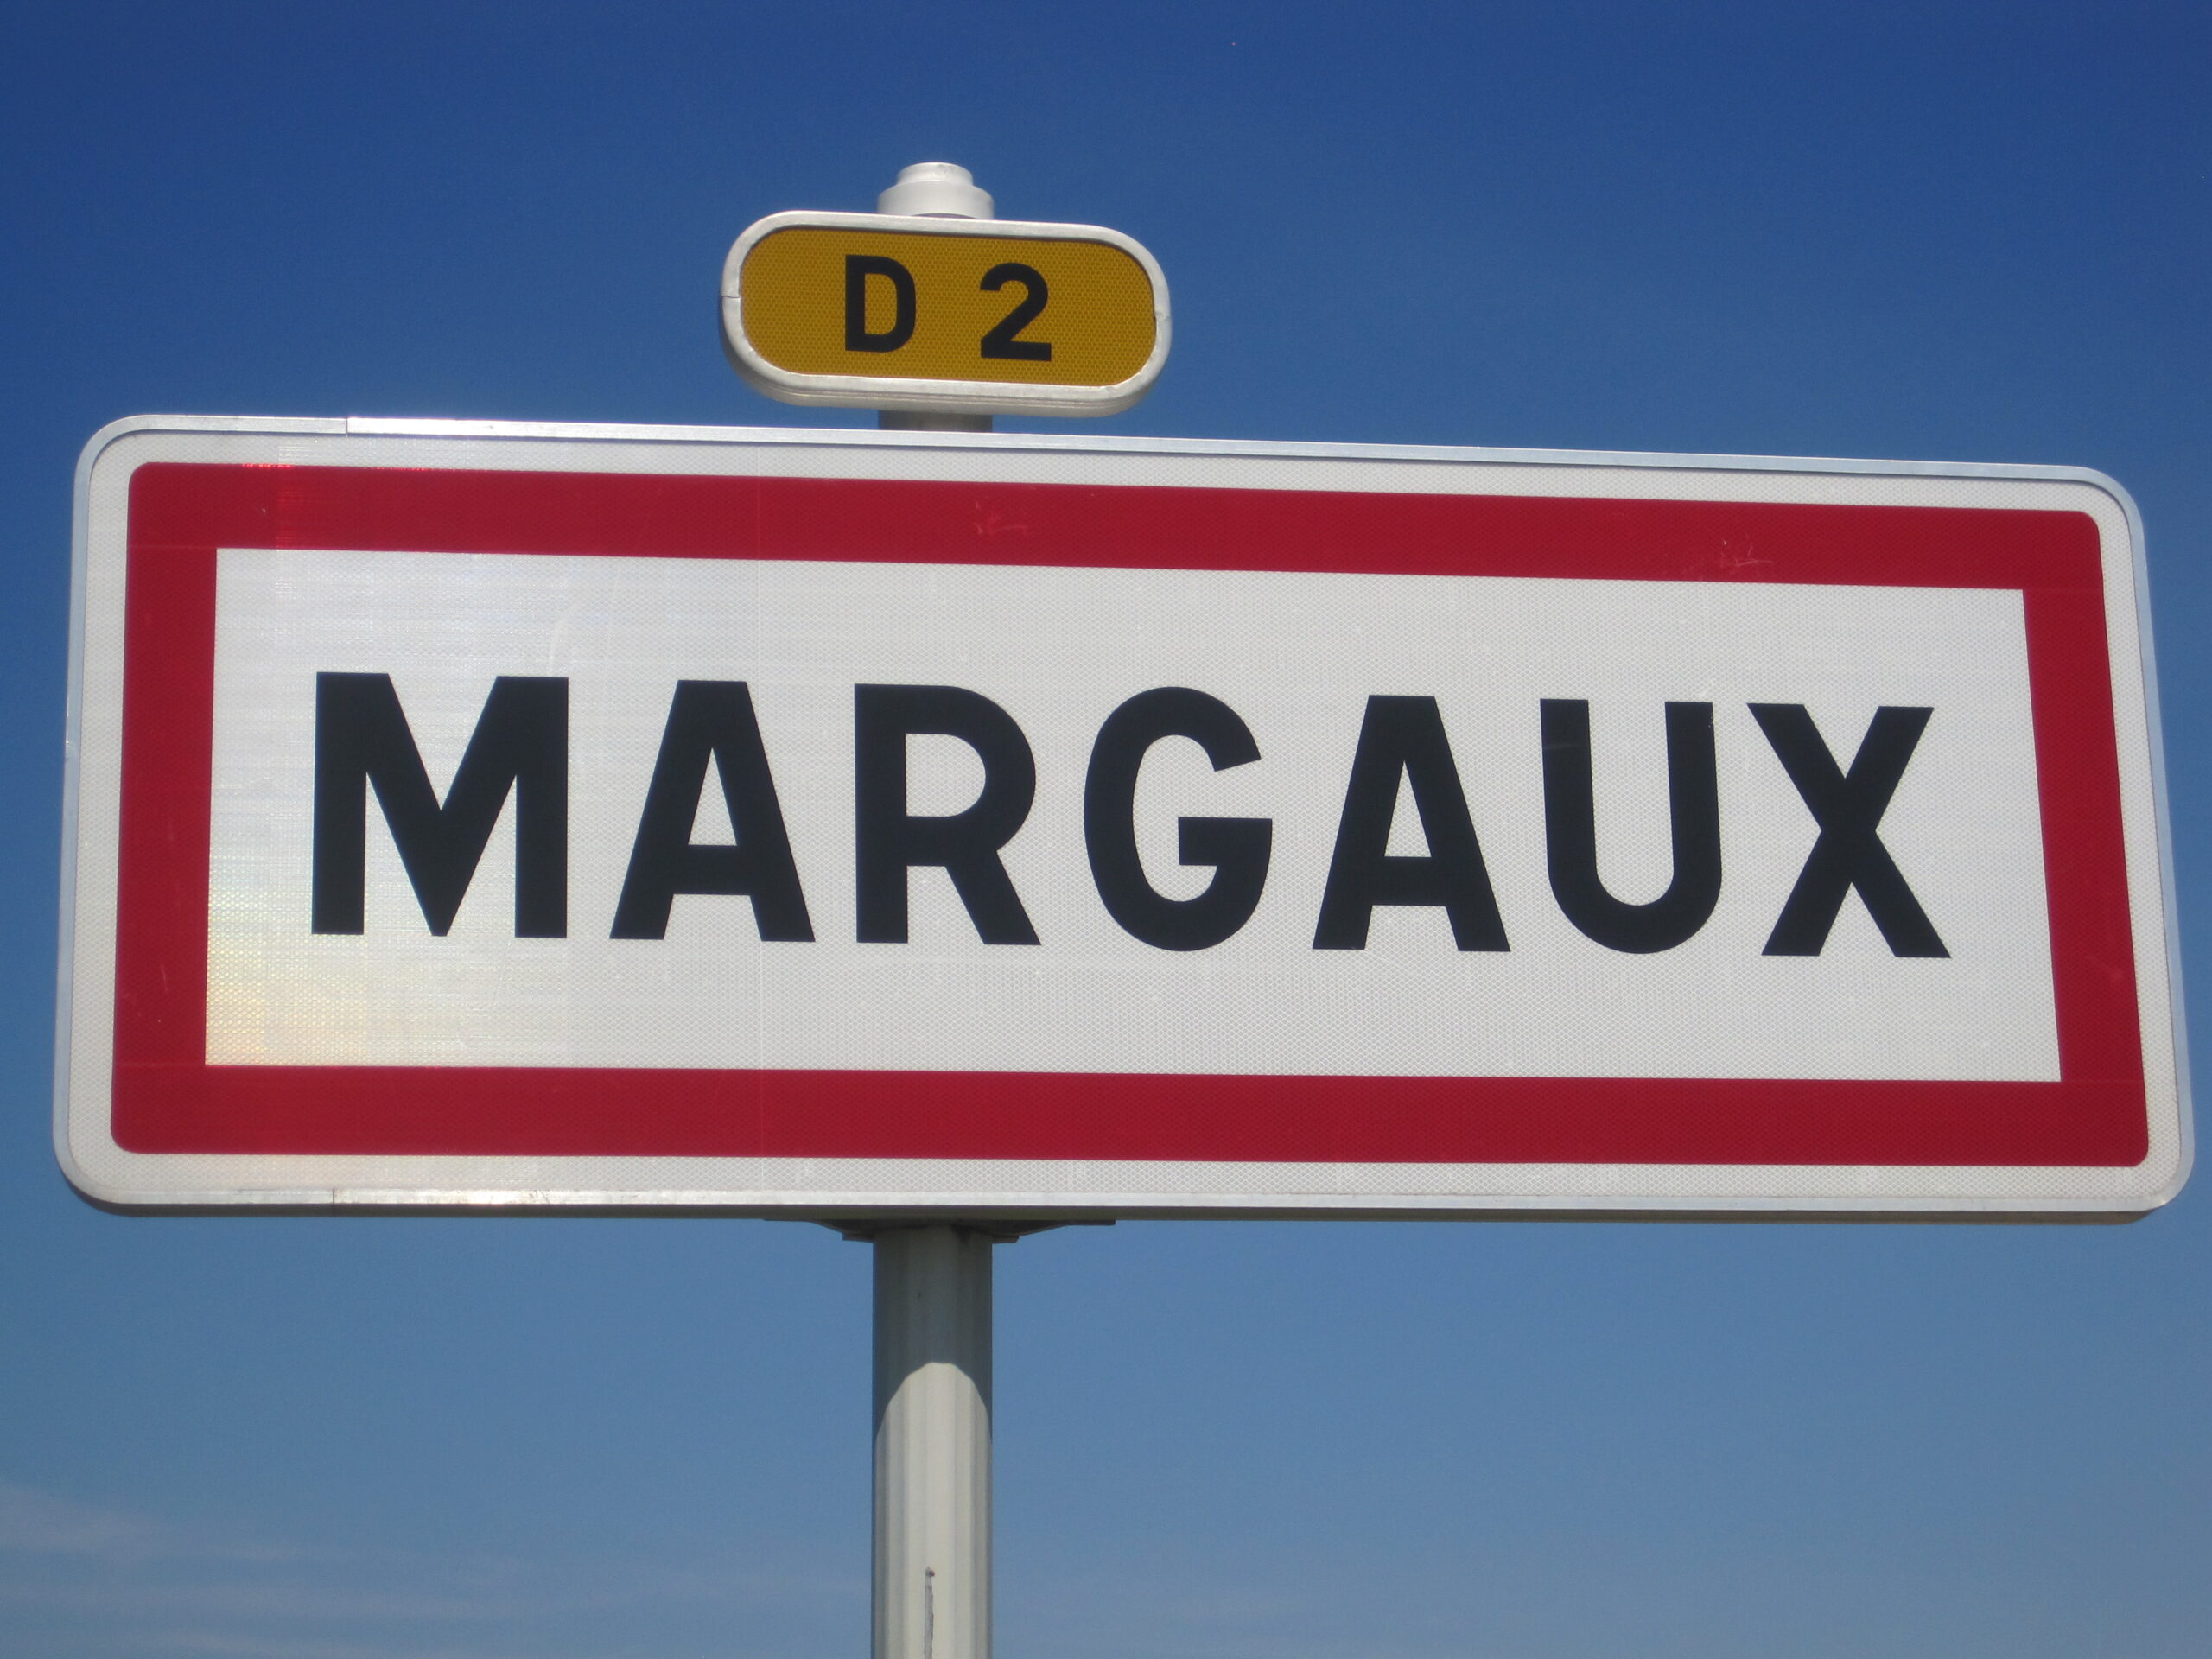 Learn about Margaux Bordeaux, Best Wines Chateaux Vineyards Character